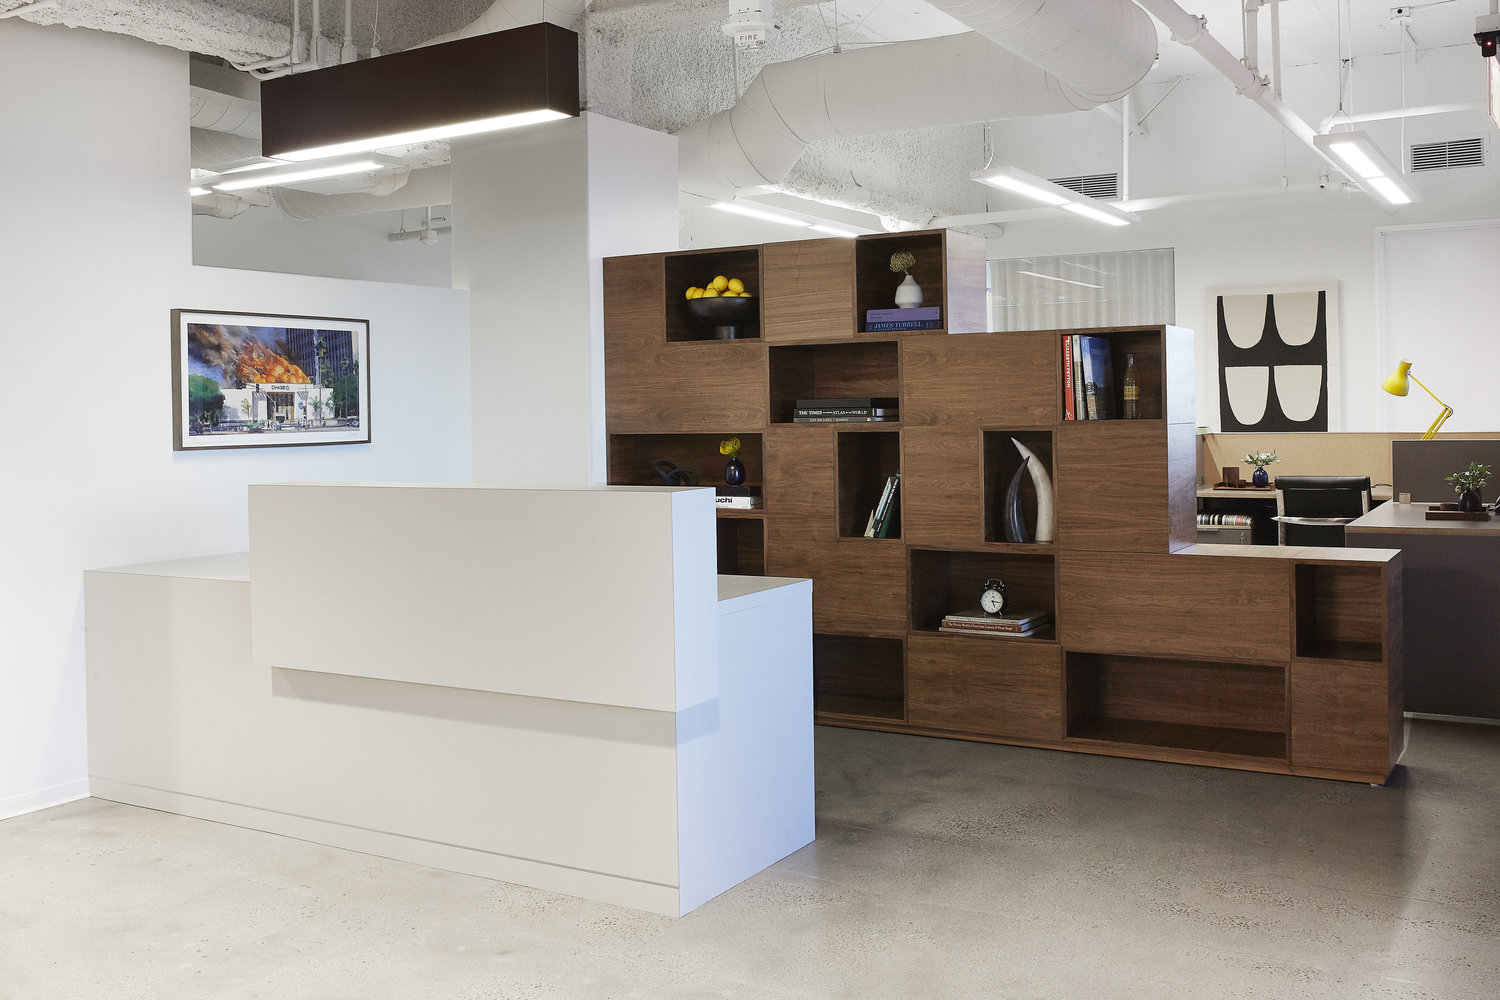 interior view of an office front desk with a modular bookcase behind